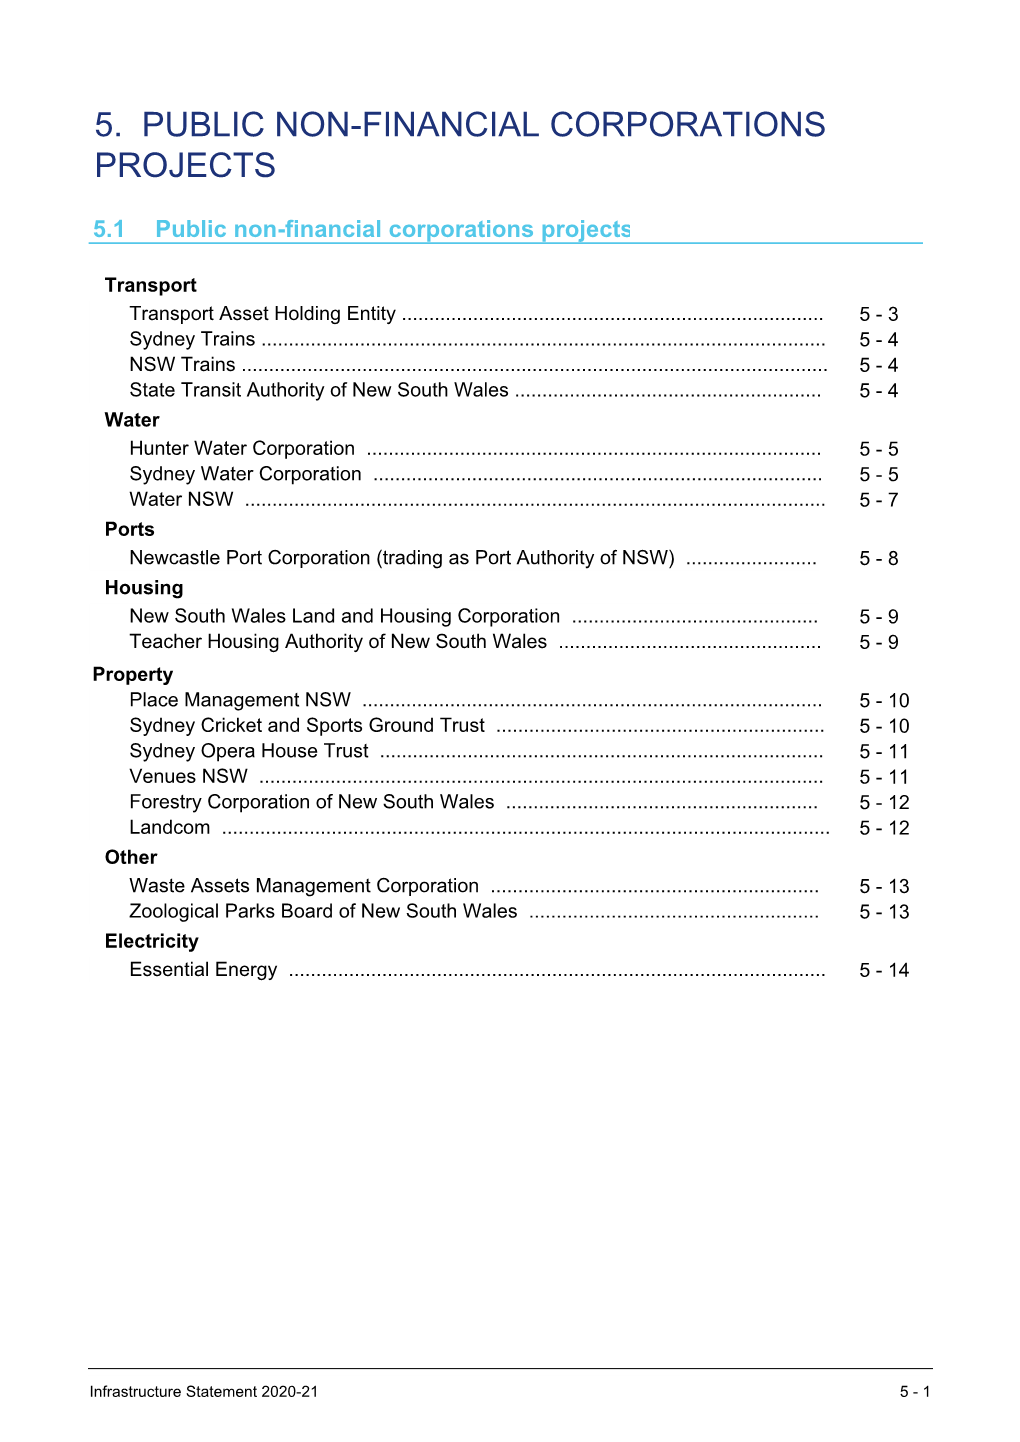 5. Public Non-Financial Corporations Projects